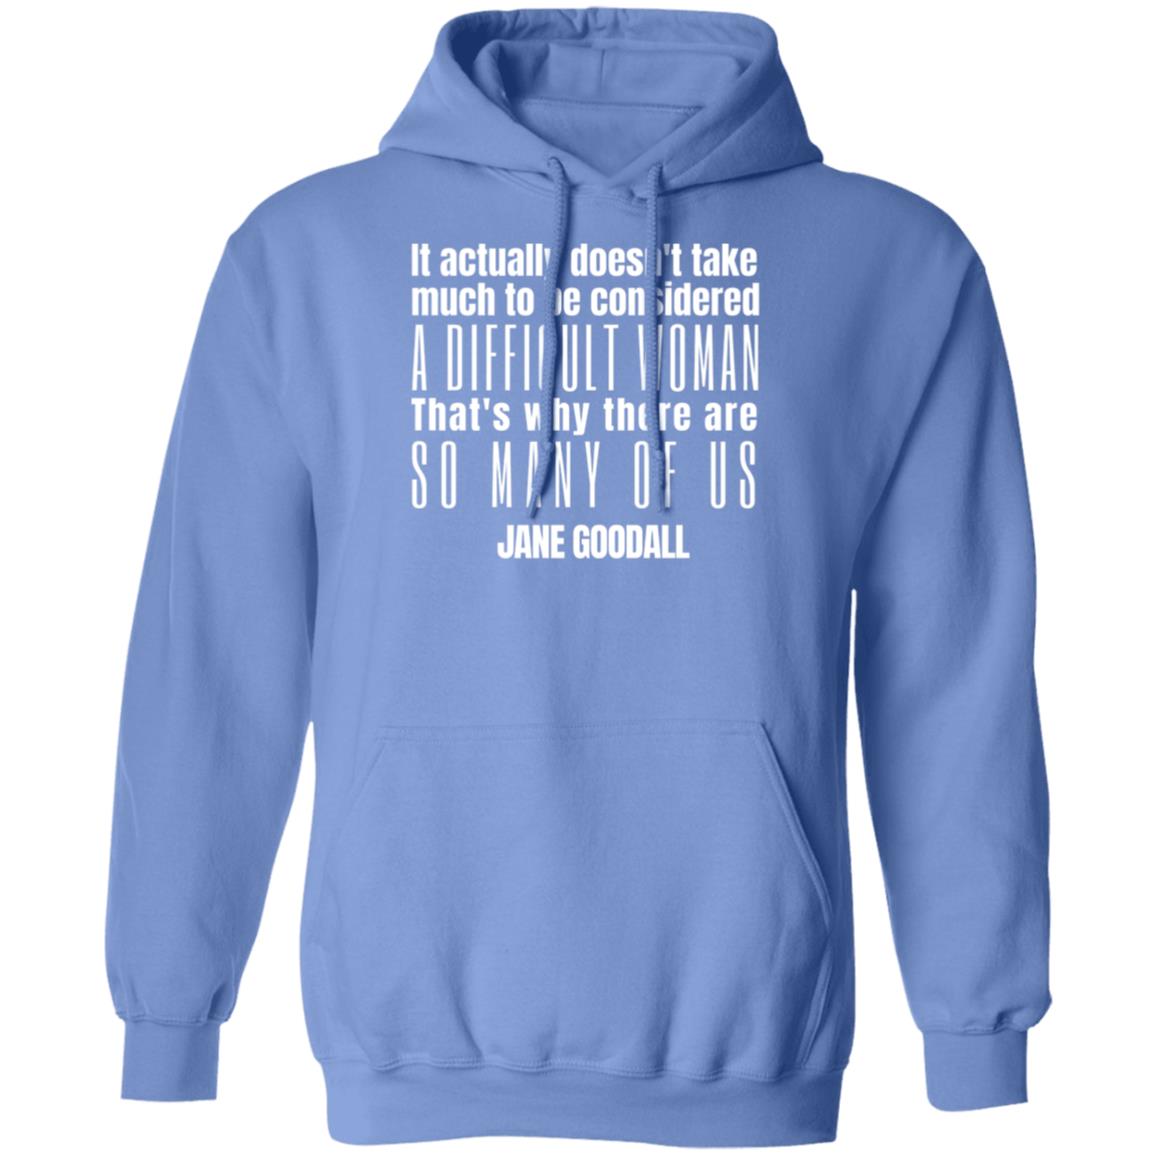 Jane Goodall Difficult Woman Quote Hooded Sweatshirt